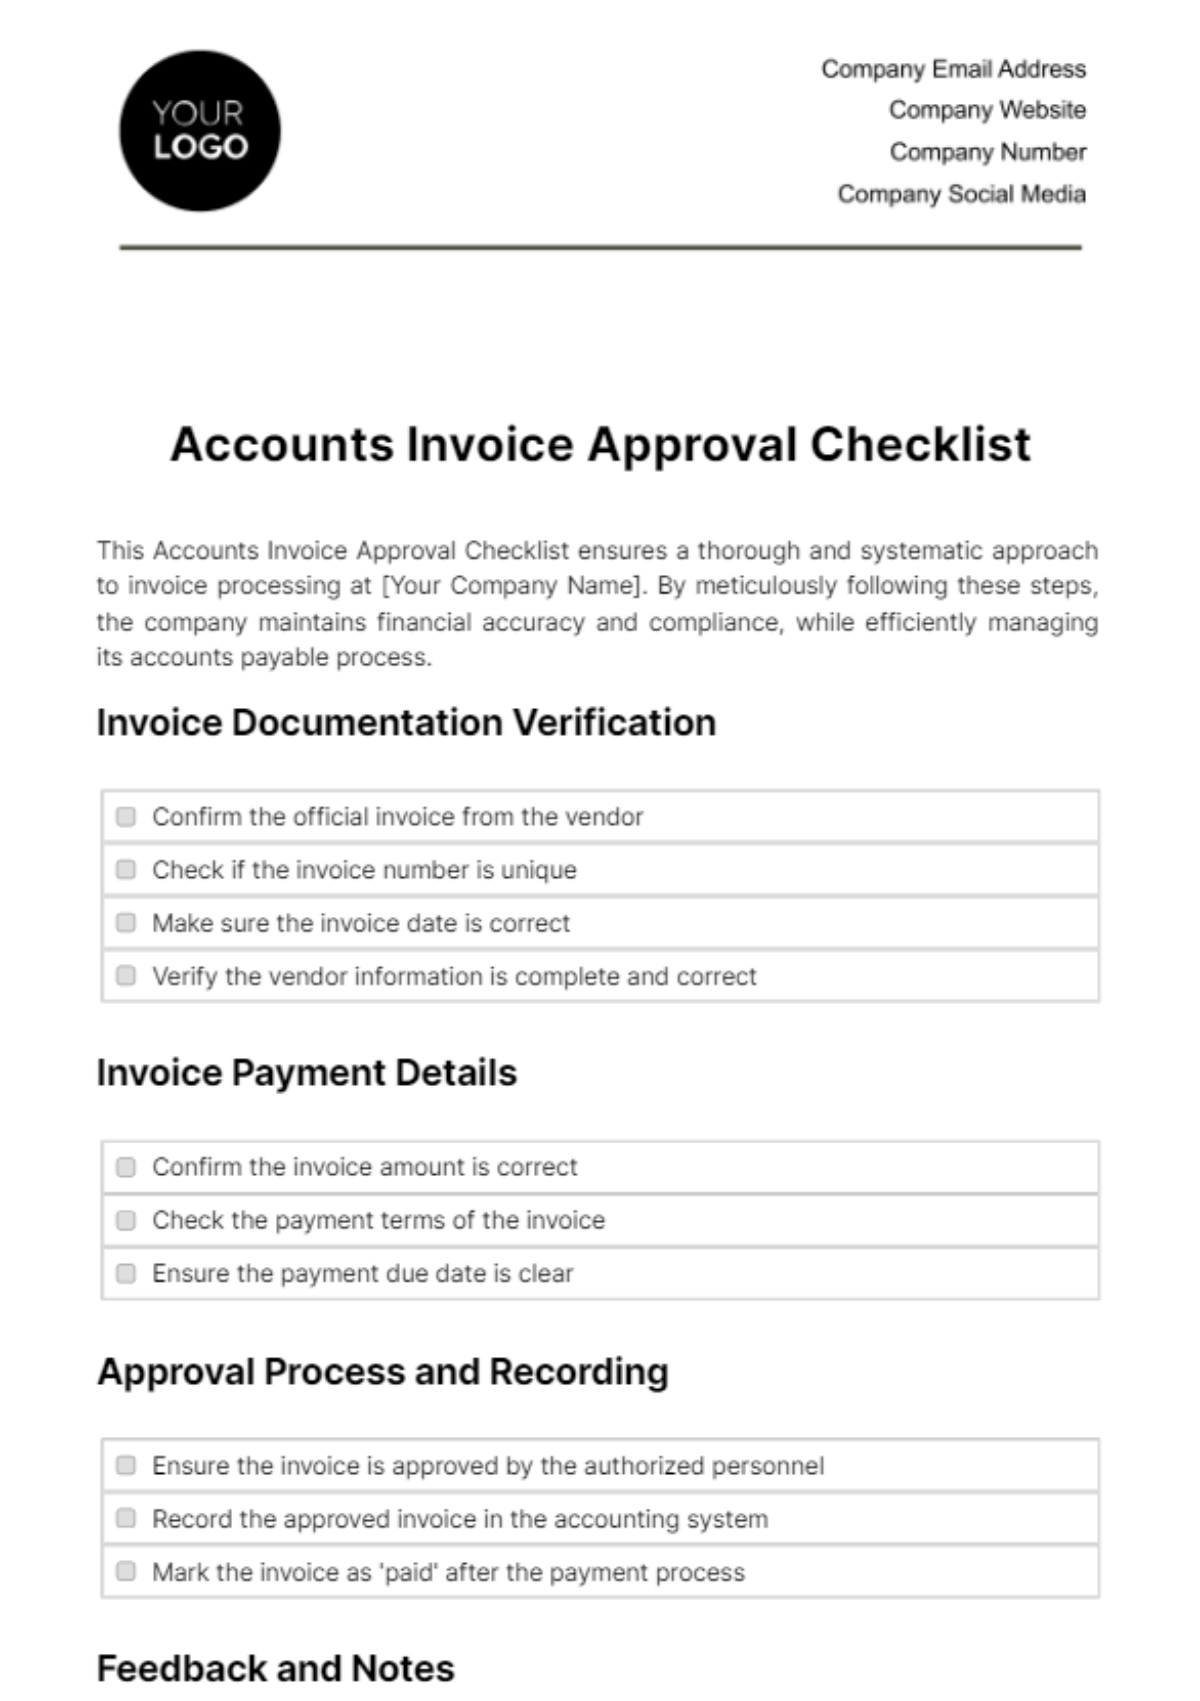 Free Accounts Invoice Approval Checklist Template